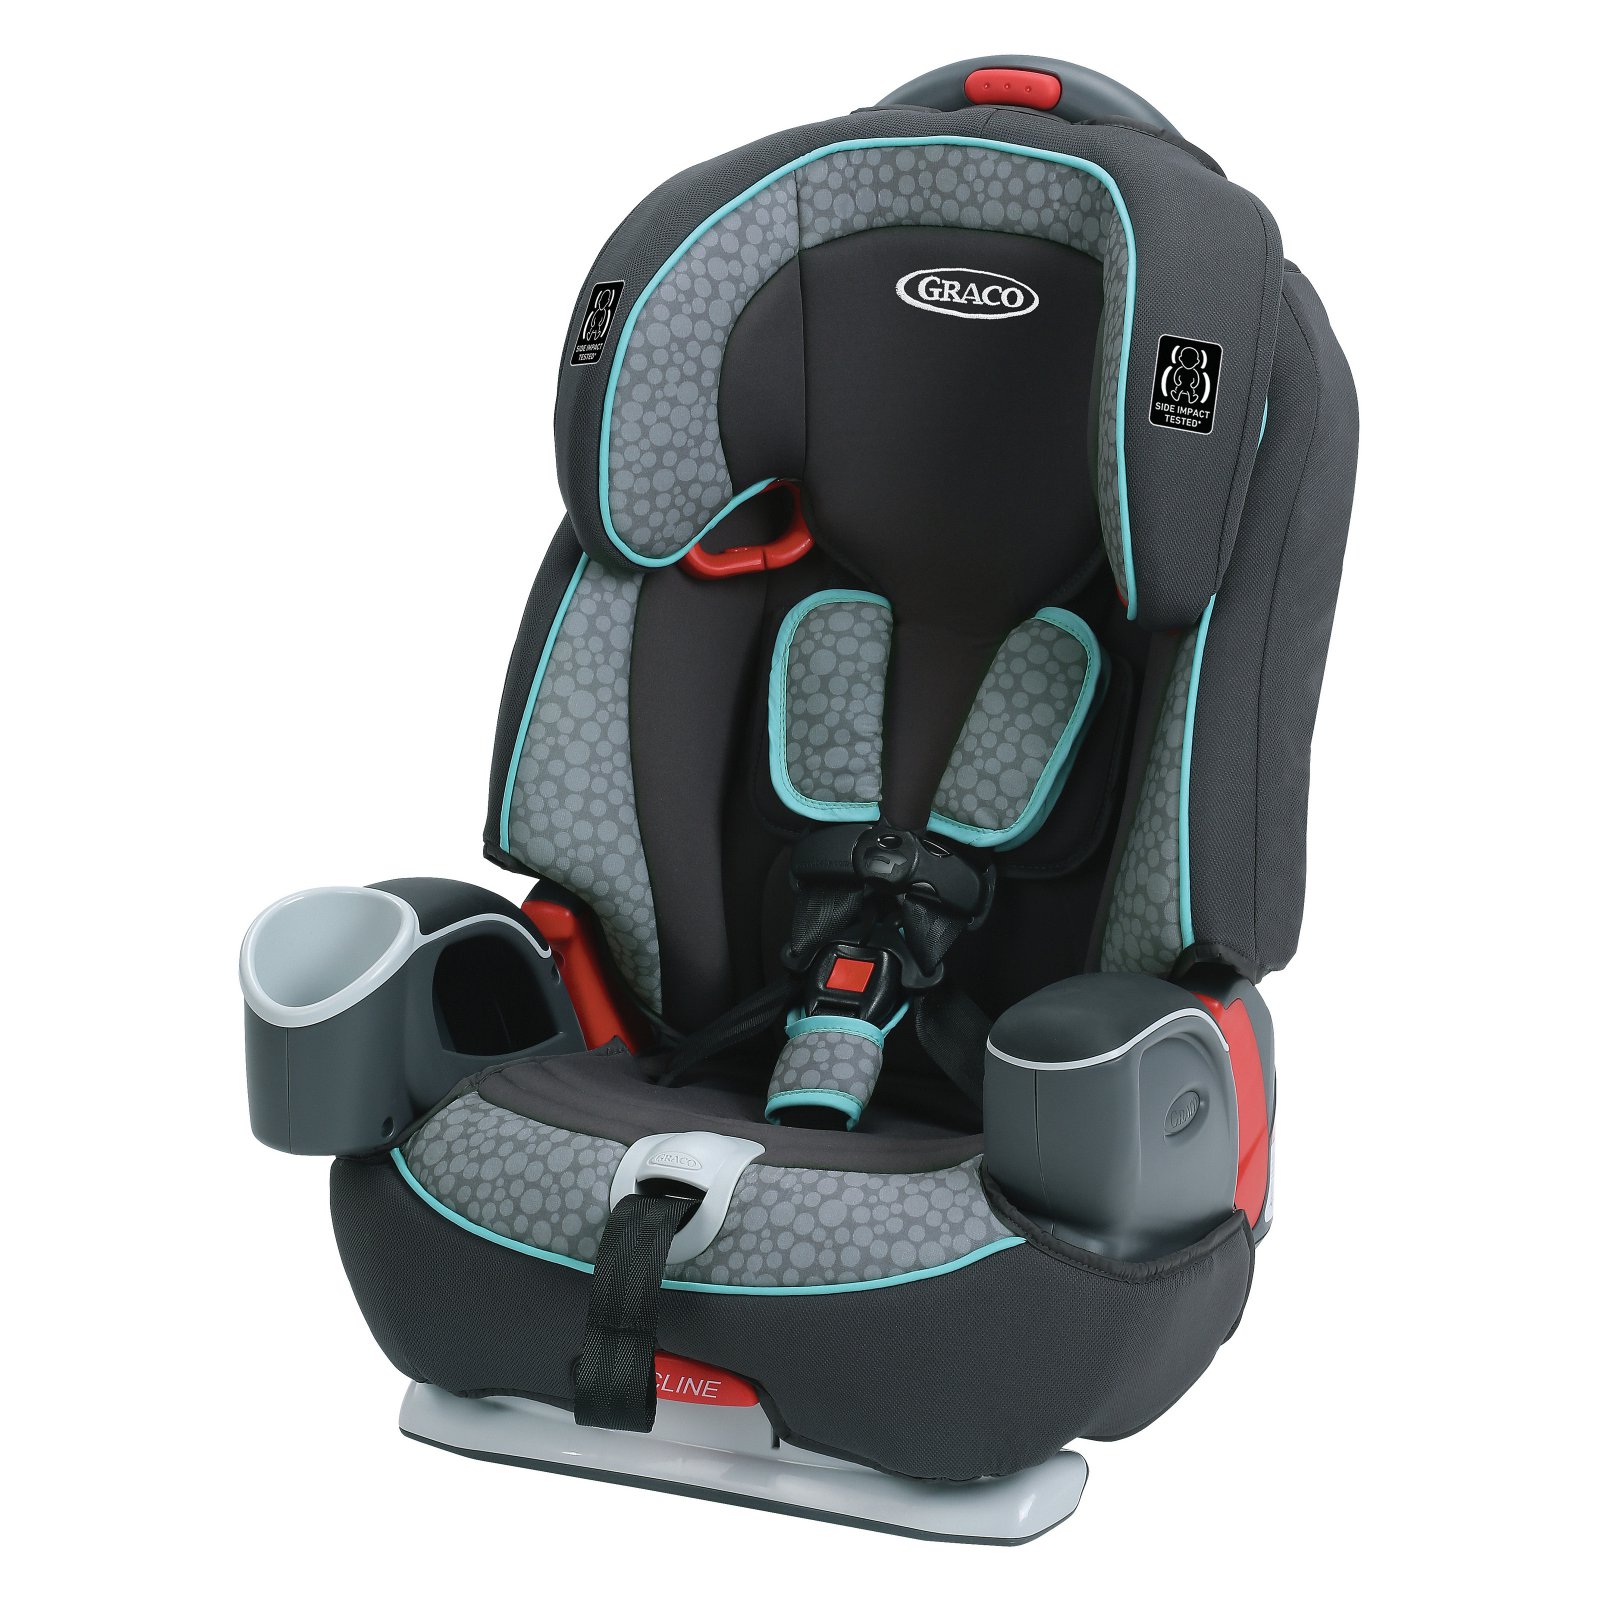 Graco® Nautilus® 65 3-in-1 Harness Booster Car Seat, Sully Teal - image 1 of 10